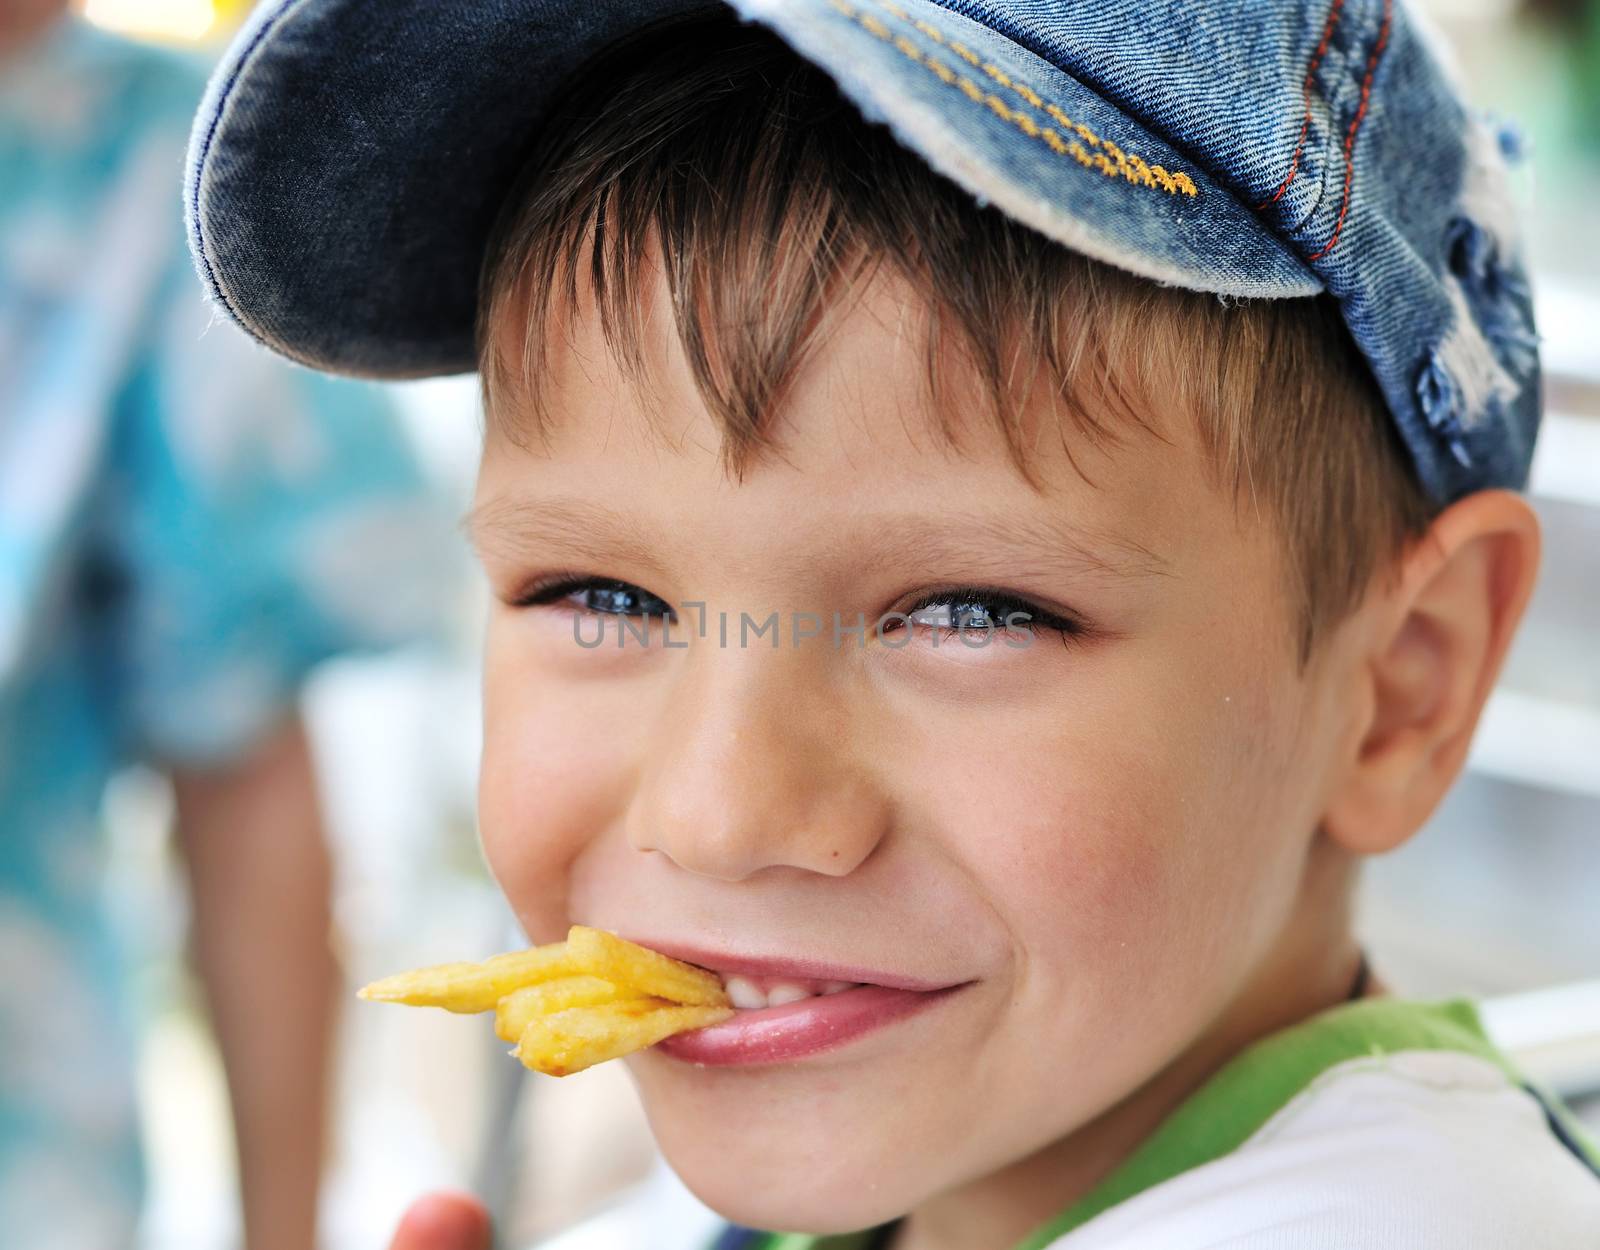 he likes fries by Reana